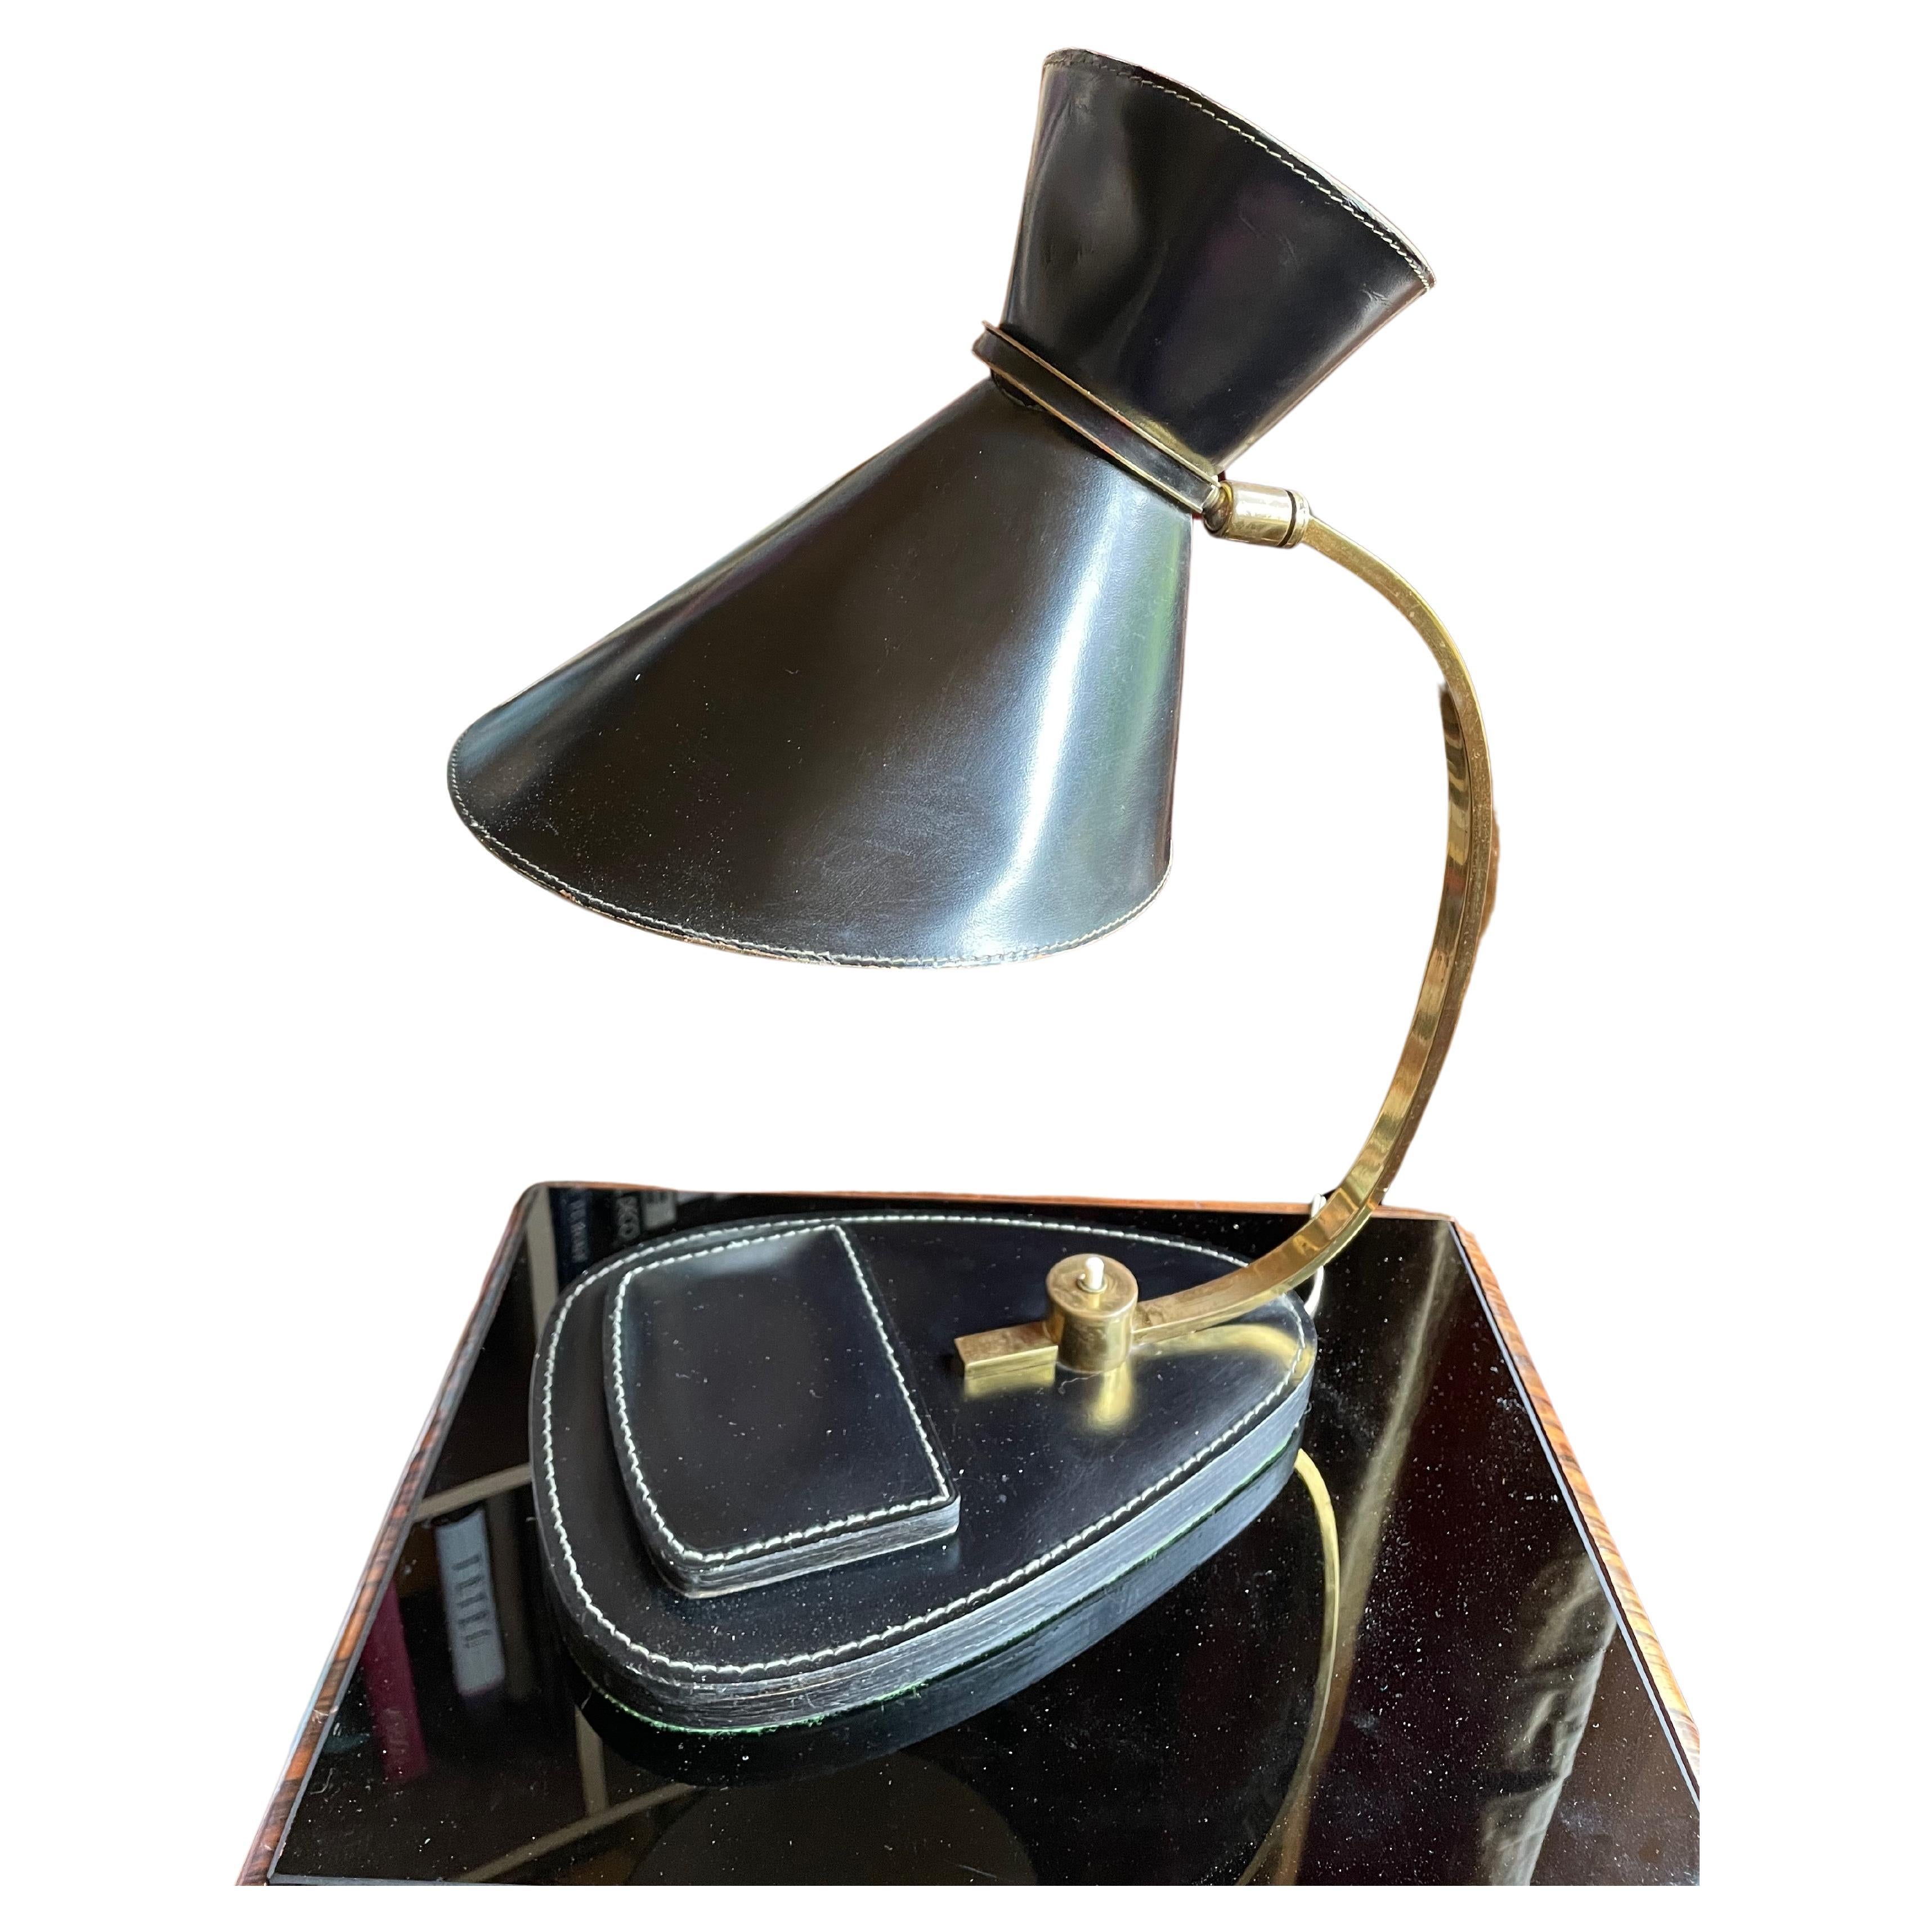 Jacques Adnet Elegant table lamp, France 1950s.
Hand-stiched leather.
Brass with slight signs of use due to age.
with swivel shade.
Hinged box
Good condition.
The shade is slightly dented in a few places.
No missing parts in the leather, no torn